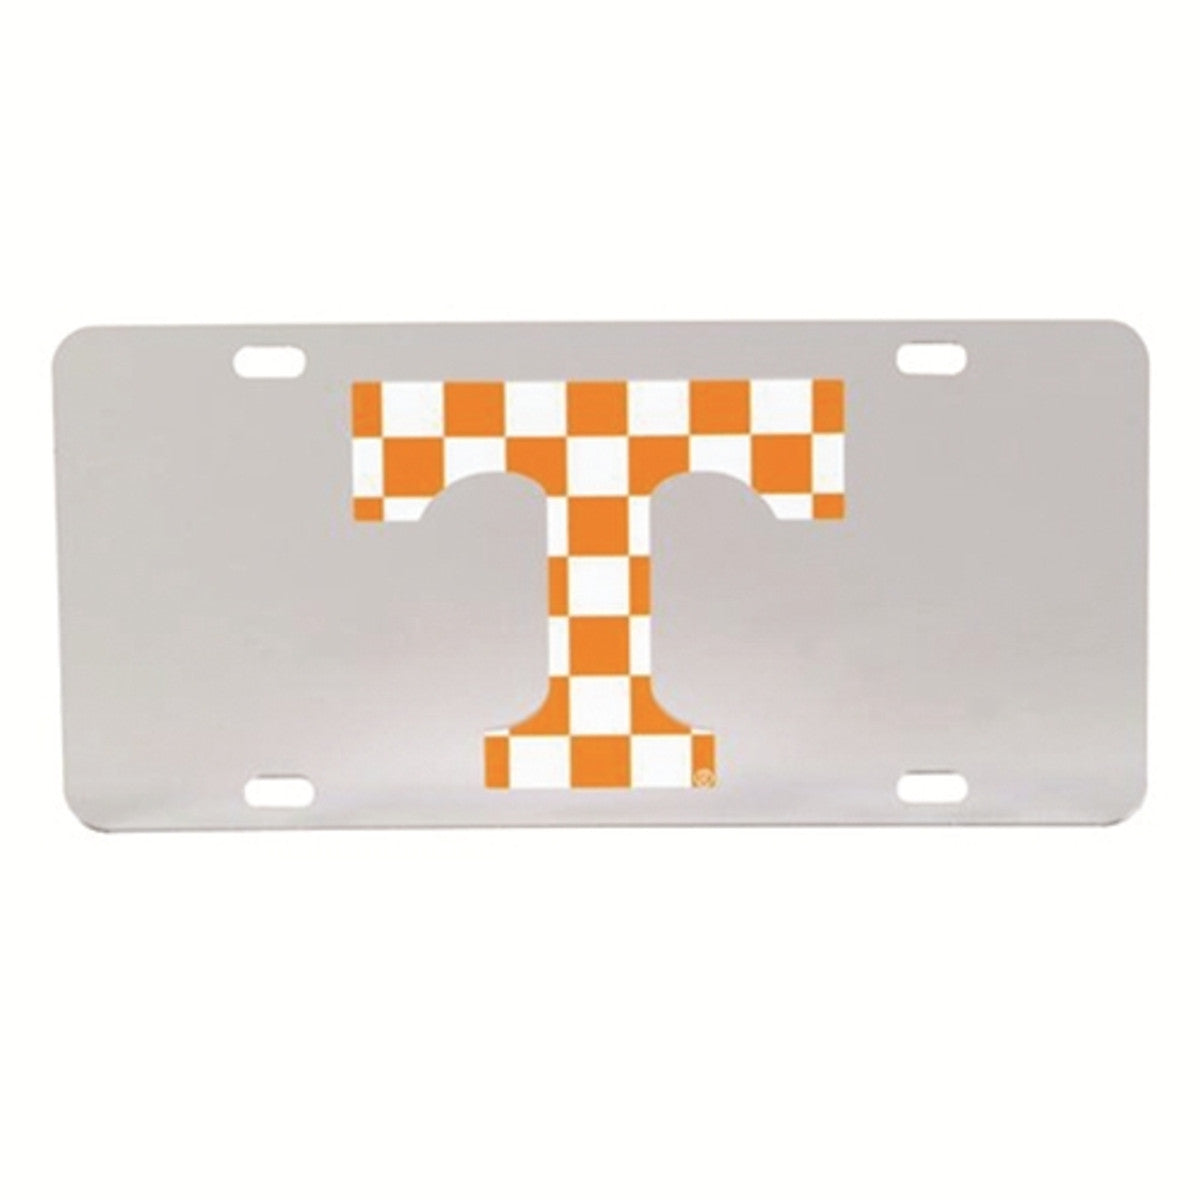 University of Tennessee Laser License Plate - Checkerboard "T"